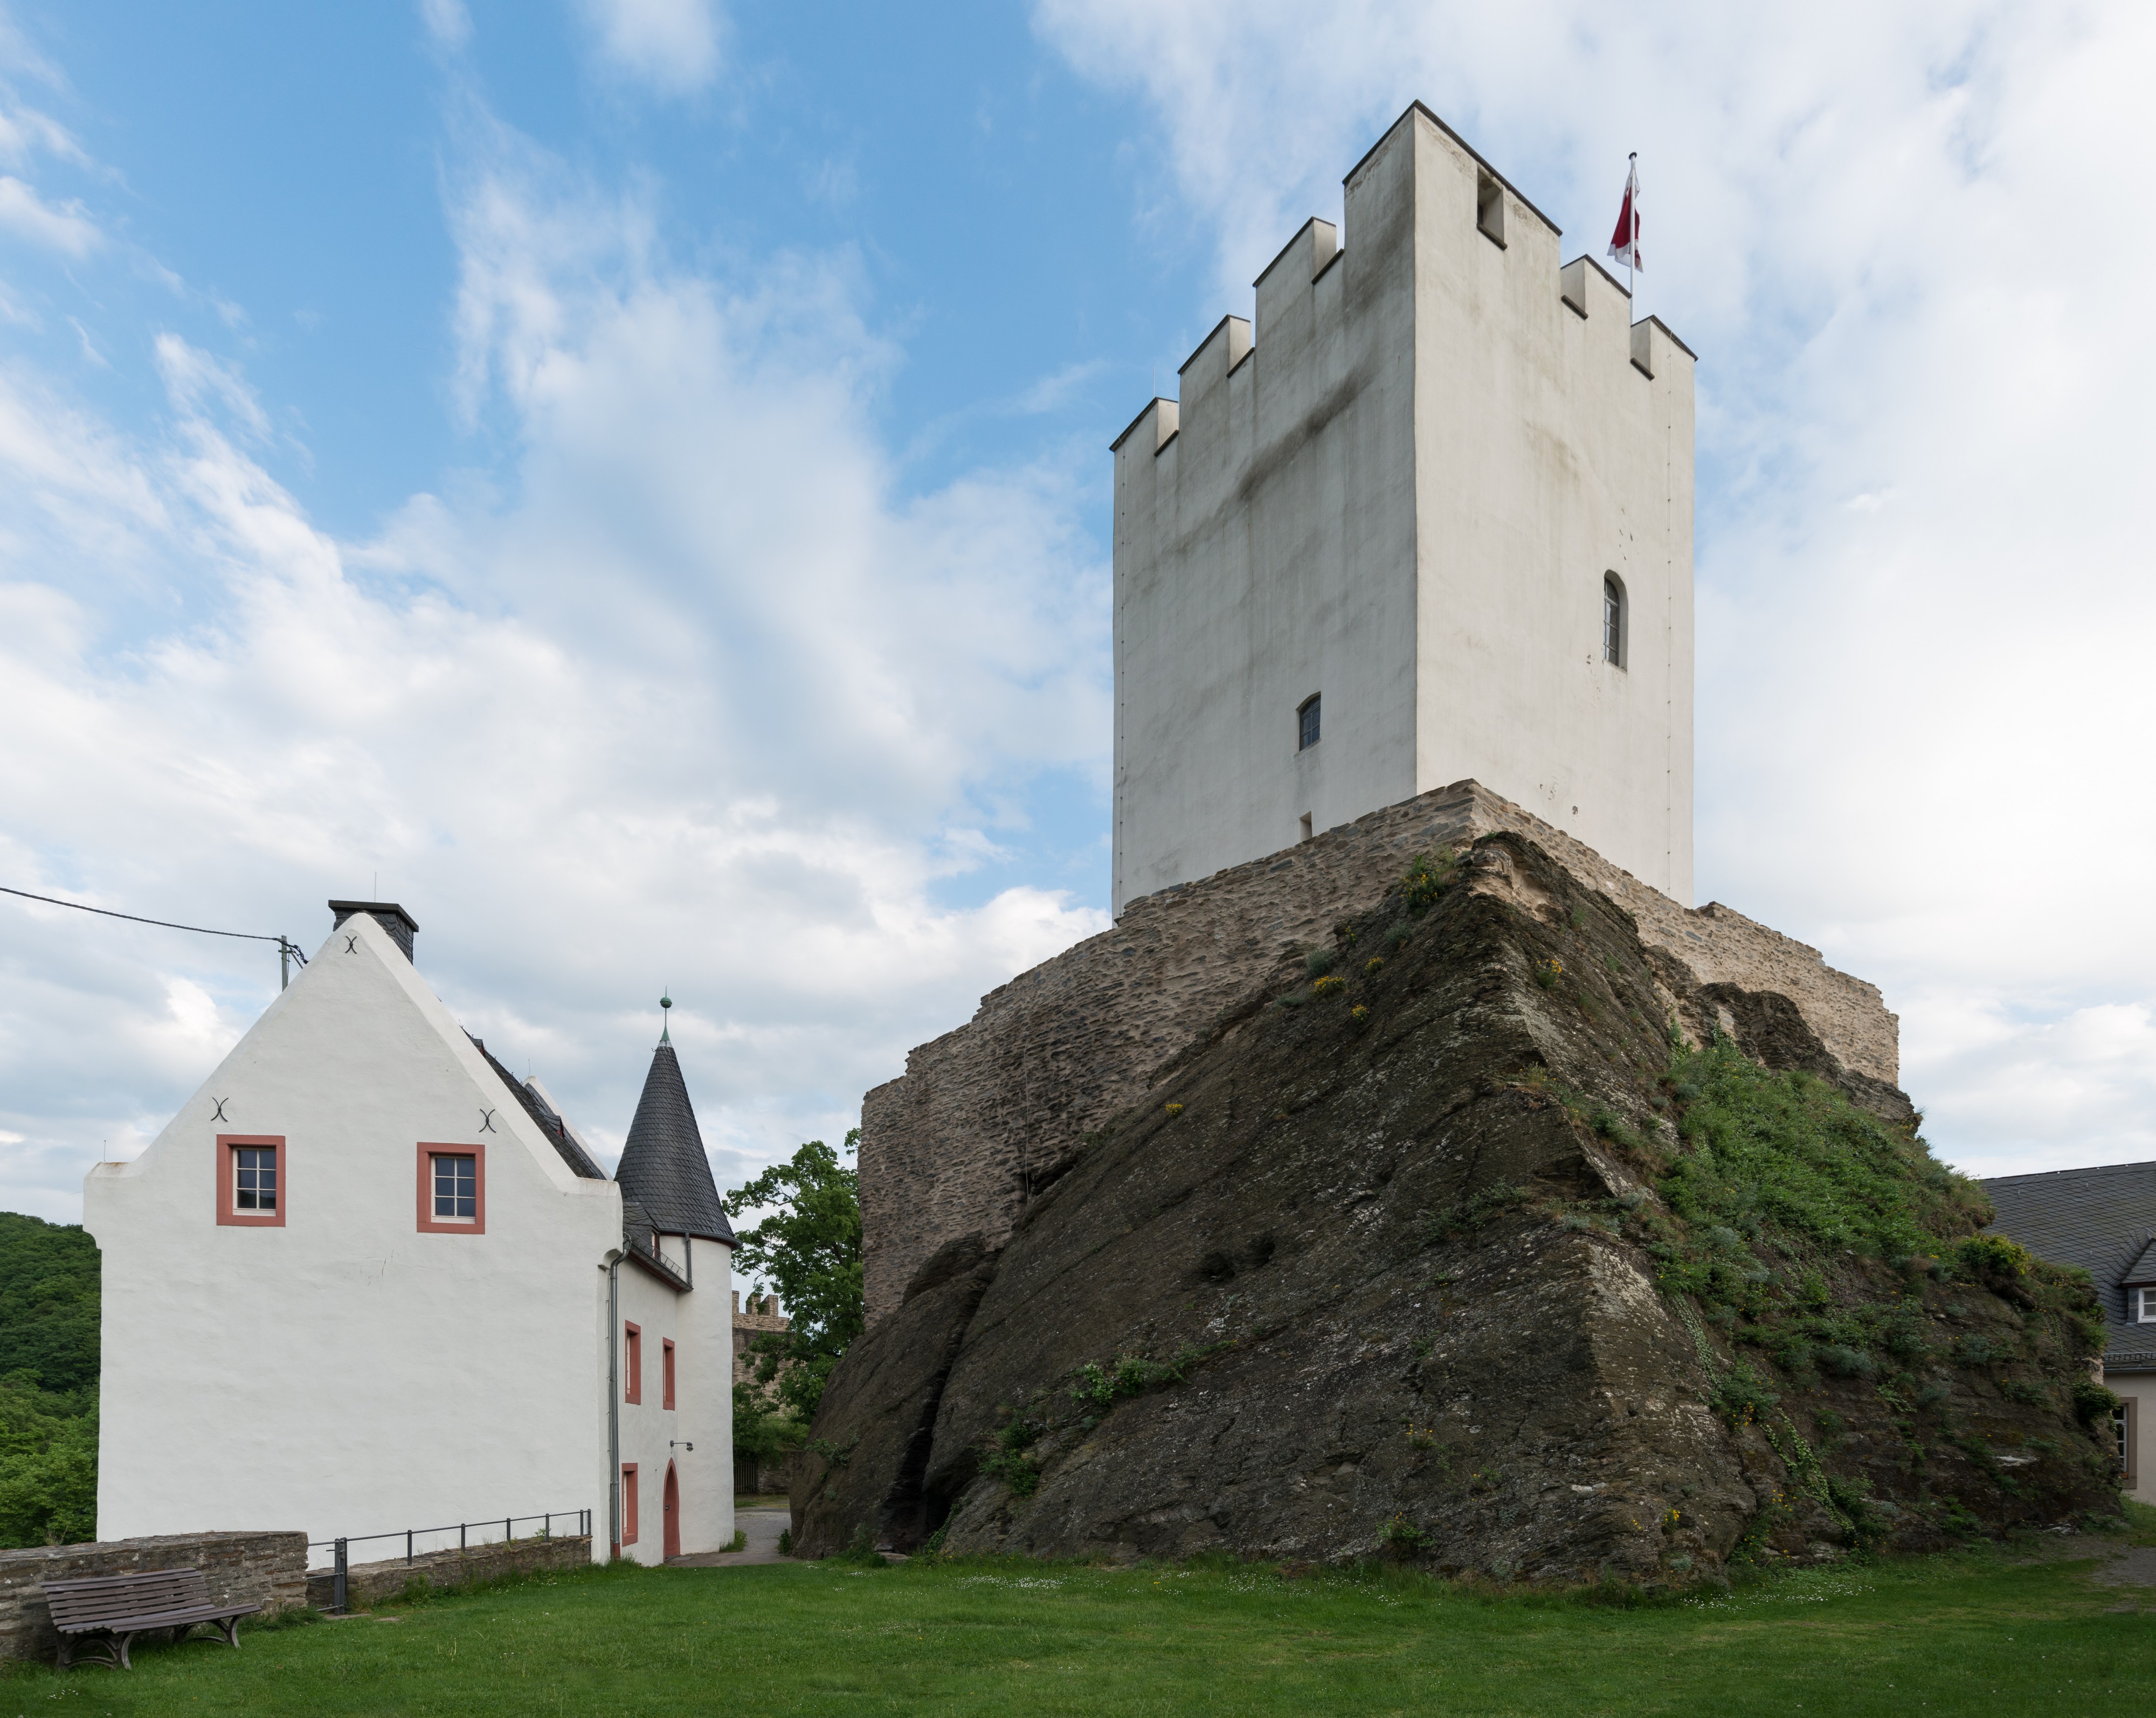 Keep and women's house, Sterrenberg Castle, Northwest view 20150513 2